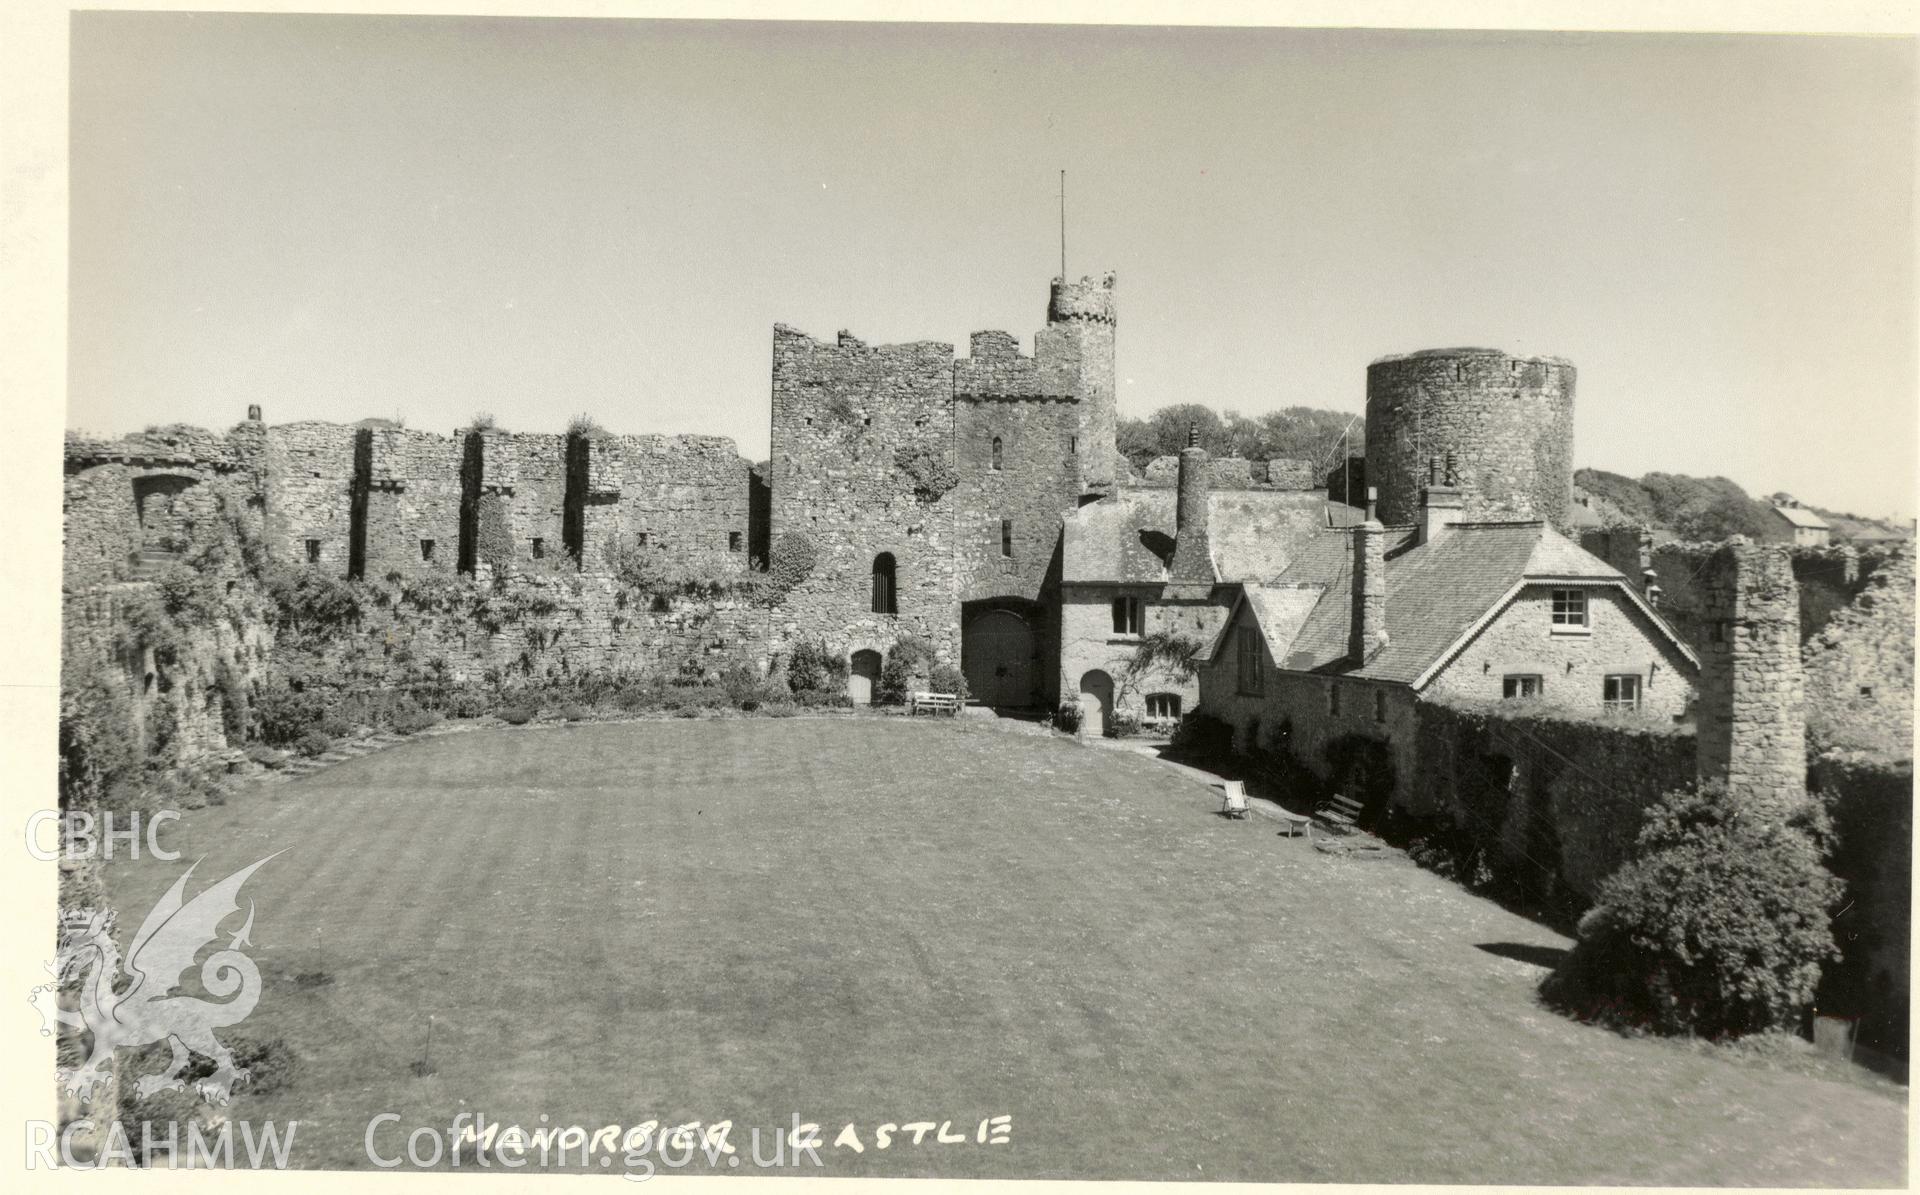 Digitised postcard image of Manorbier Castle, Squibbs Studios, Tenby. Produced by Parks and Gardens Data Services, from an original item in the Peter Davis Collection at Parks and Gardens UK. We hold only web-resolution images of this collection, suitable for viewing on screen and for research purposes only. We do not hold the original images, or publication quality scans.